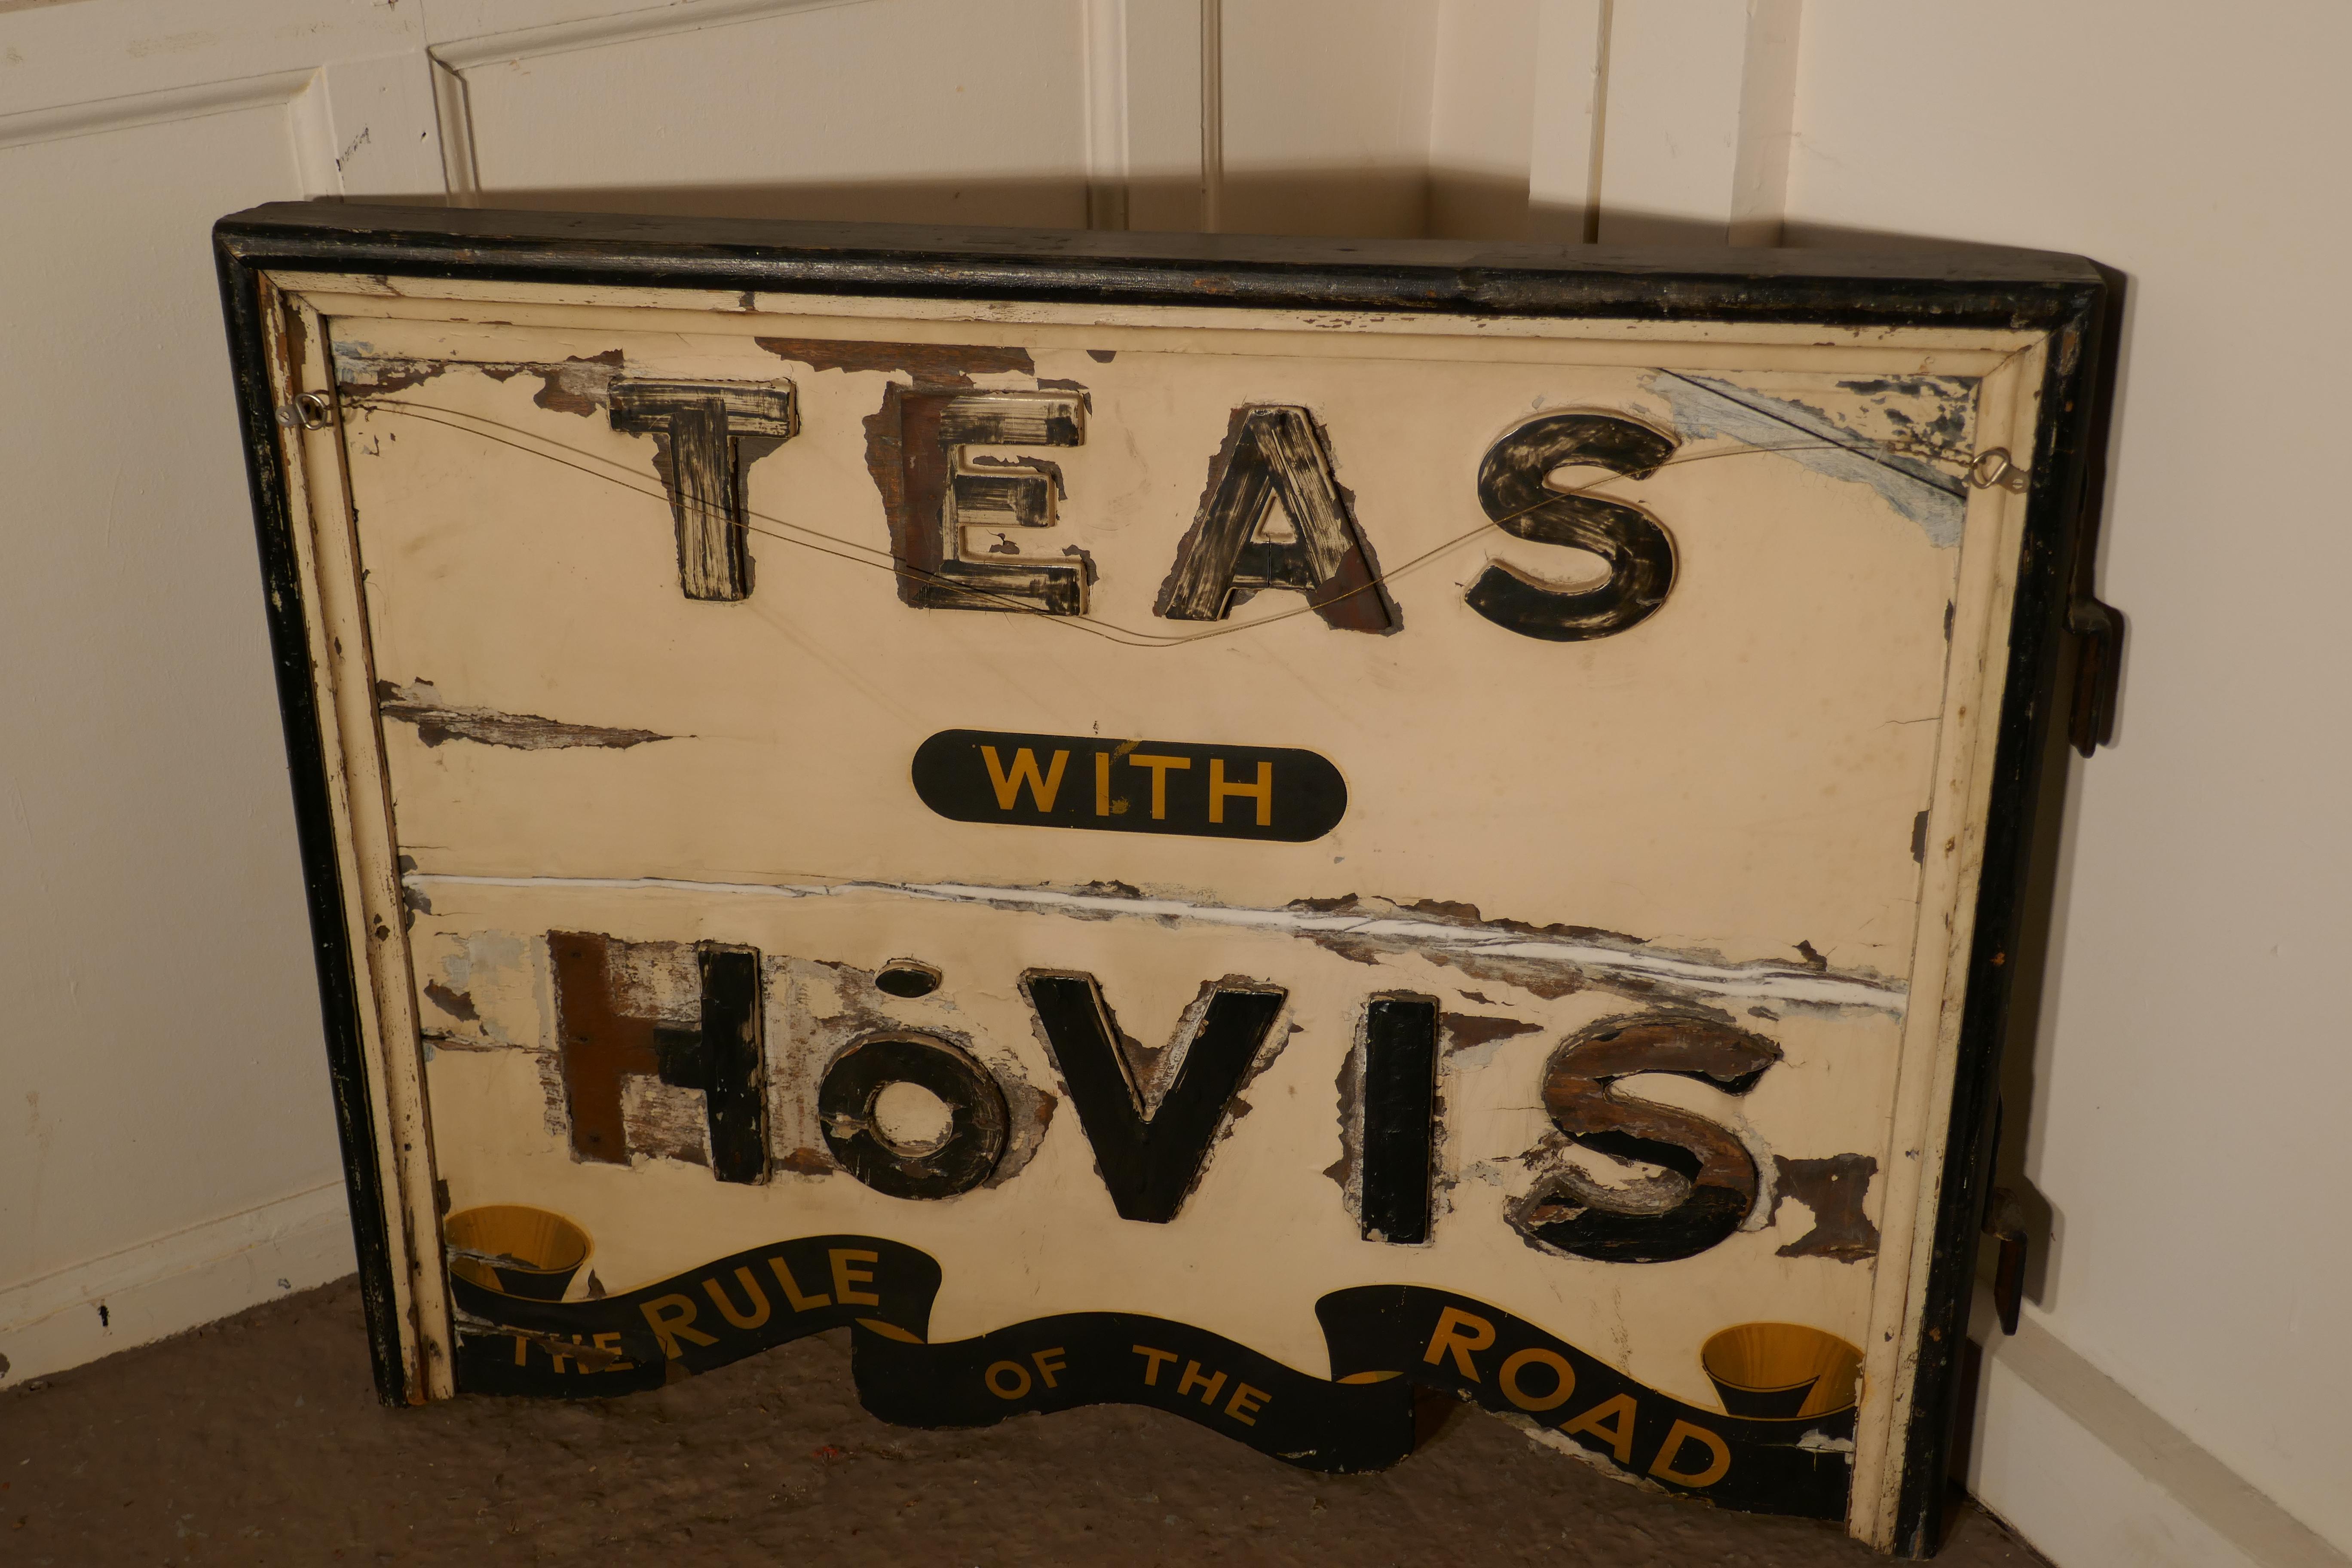 Three Dimensional Double-Sided Wooden Hovis Tea Shop Sign In Distressed Condition For Sale In Chillerton, Isle of Wight